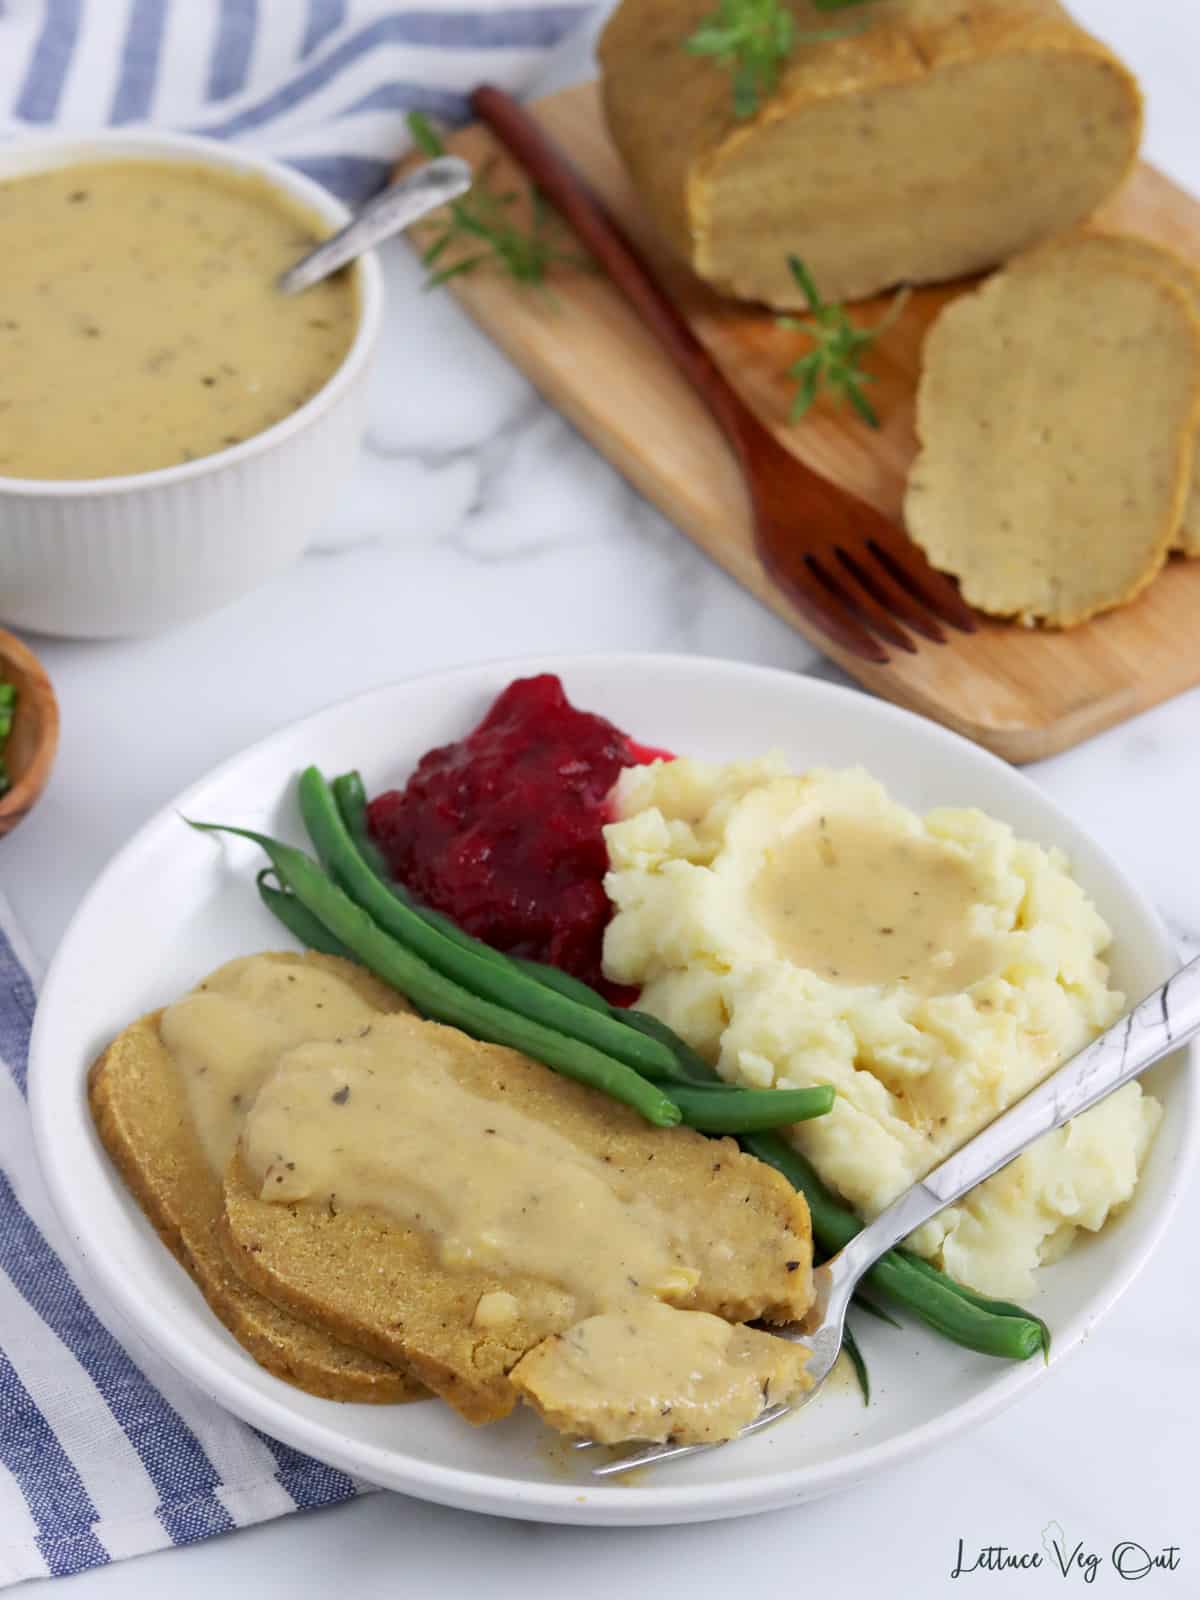 Plate of vegan turkey roast with gravy, potatoes, green beans and cranberry sauce with serving board of roast in background.